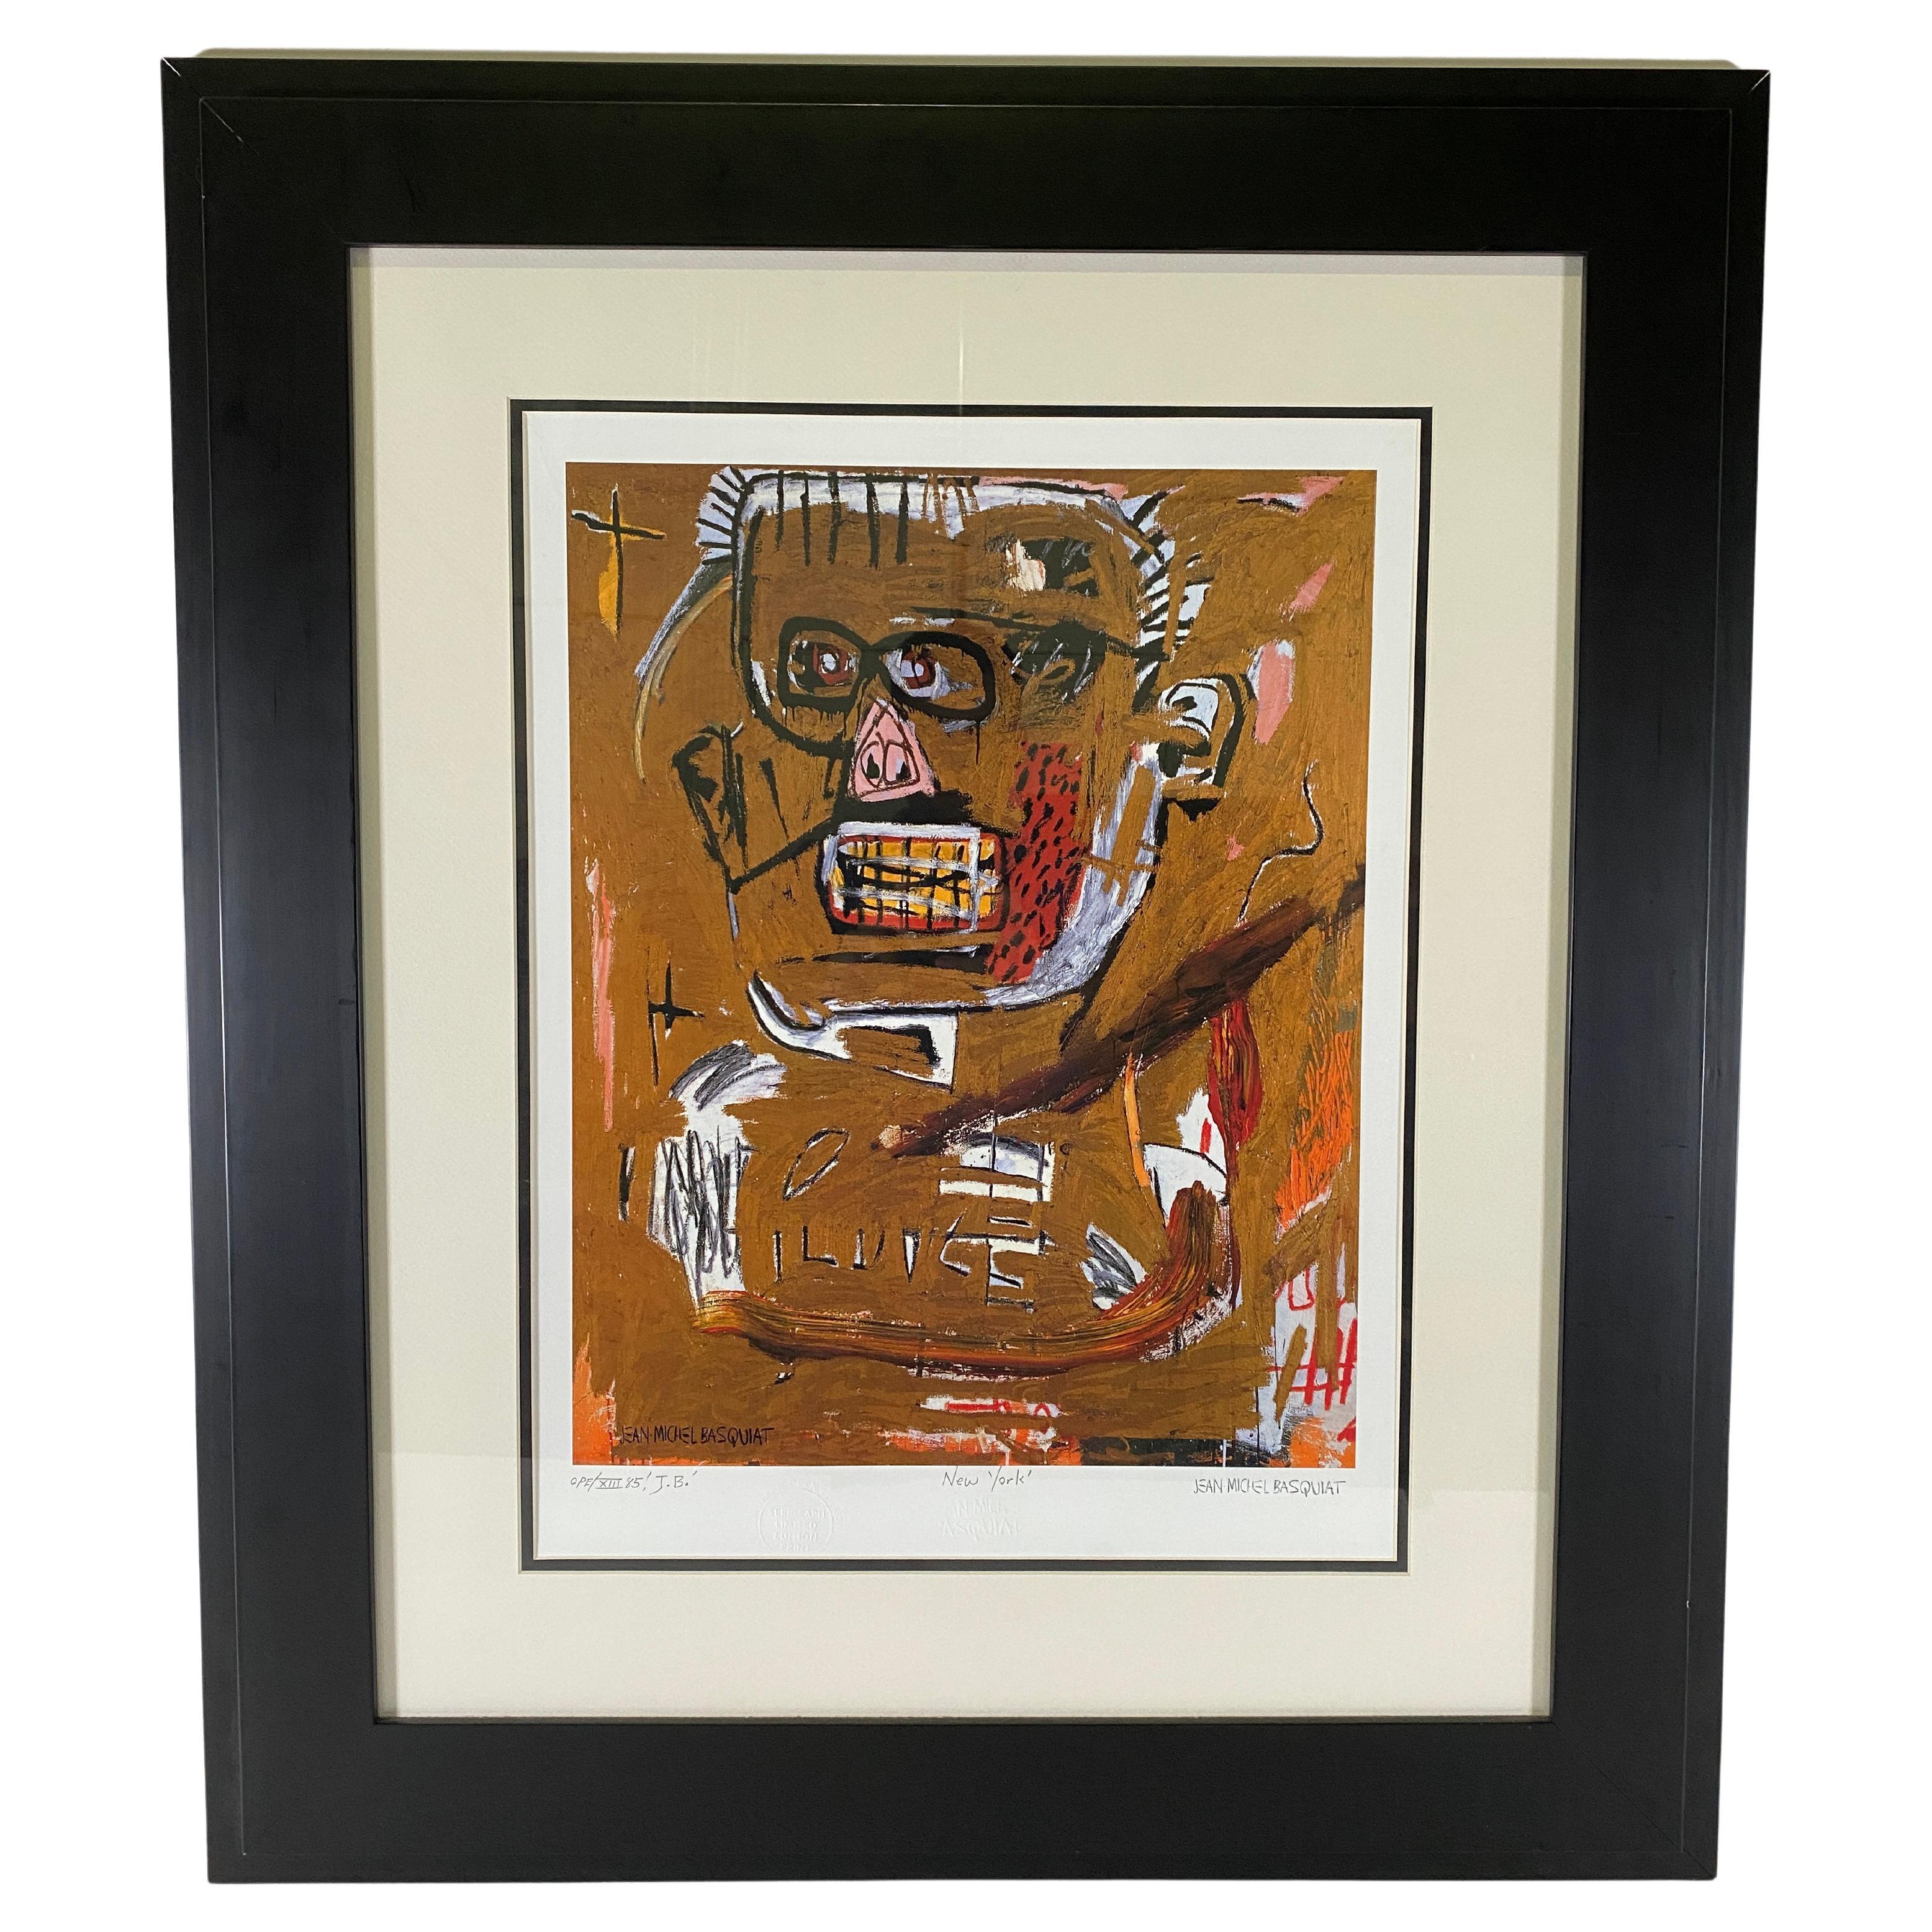 American Abstract Expressionist Lithograph, "Hardware"Jean Michel Basquiat